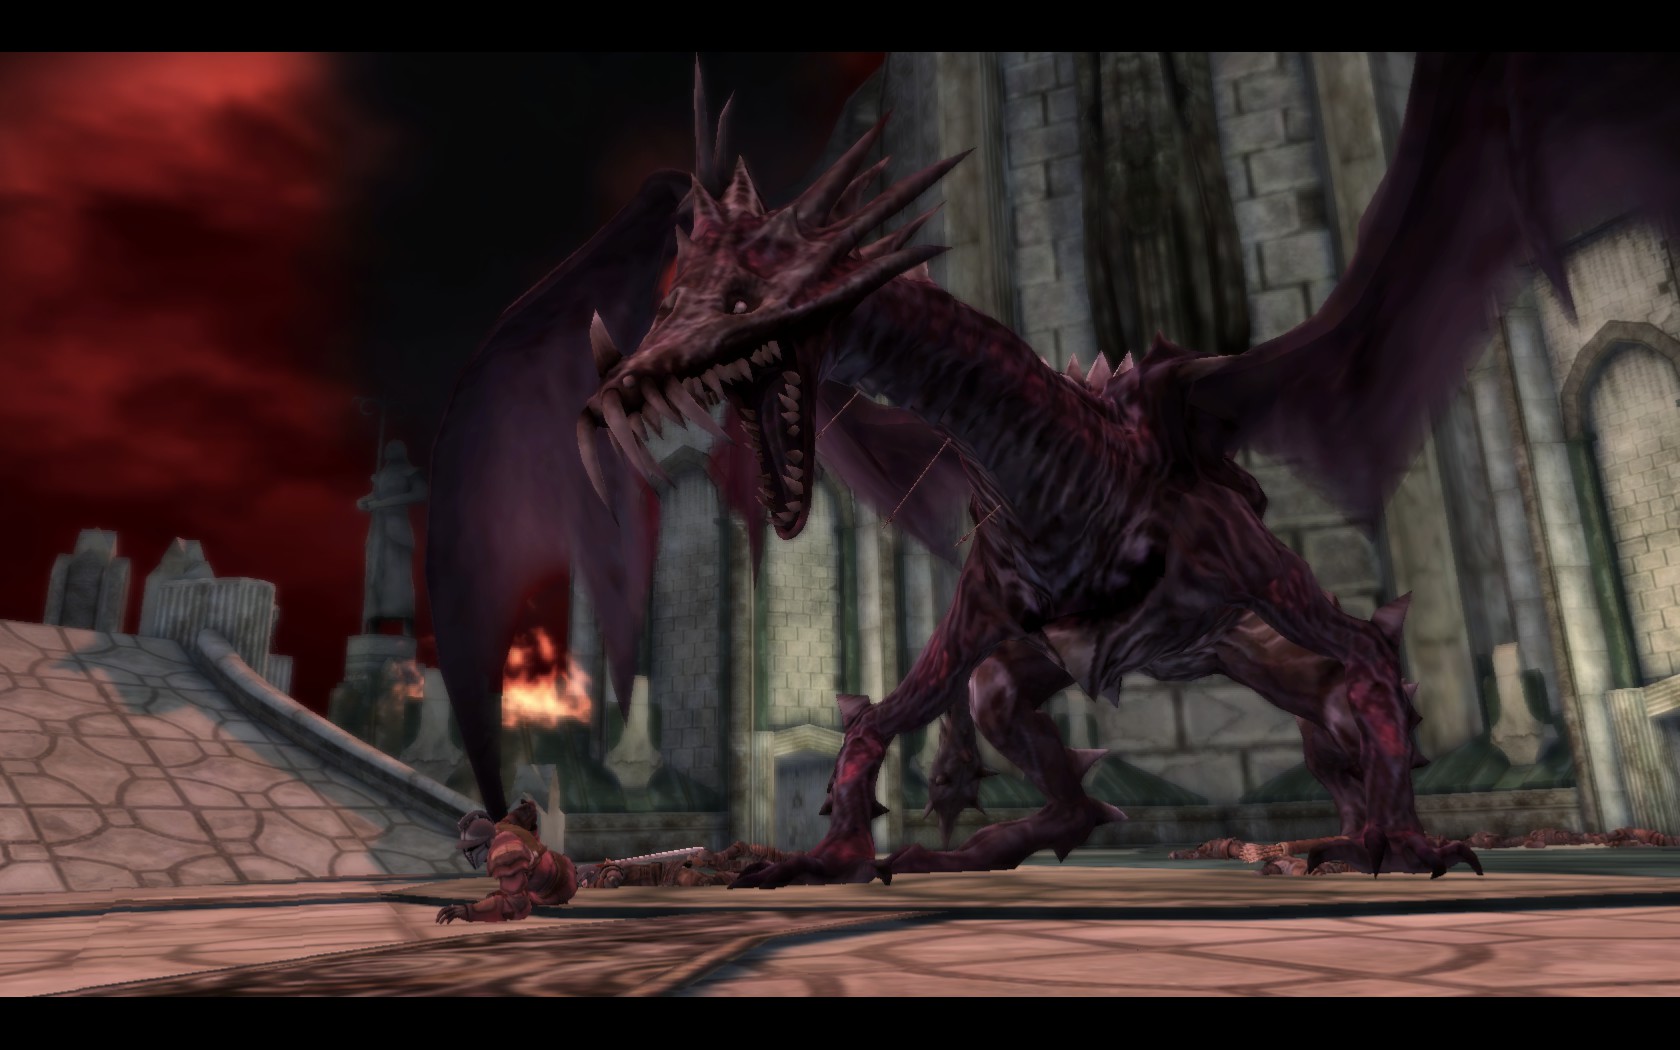 Dragon Age: Origins Has Made Me Rethink My Stance On Remakes